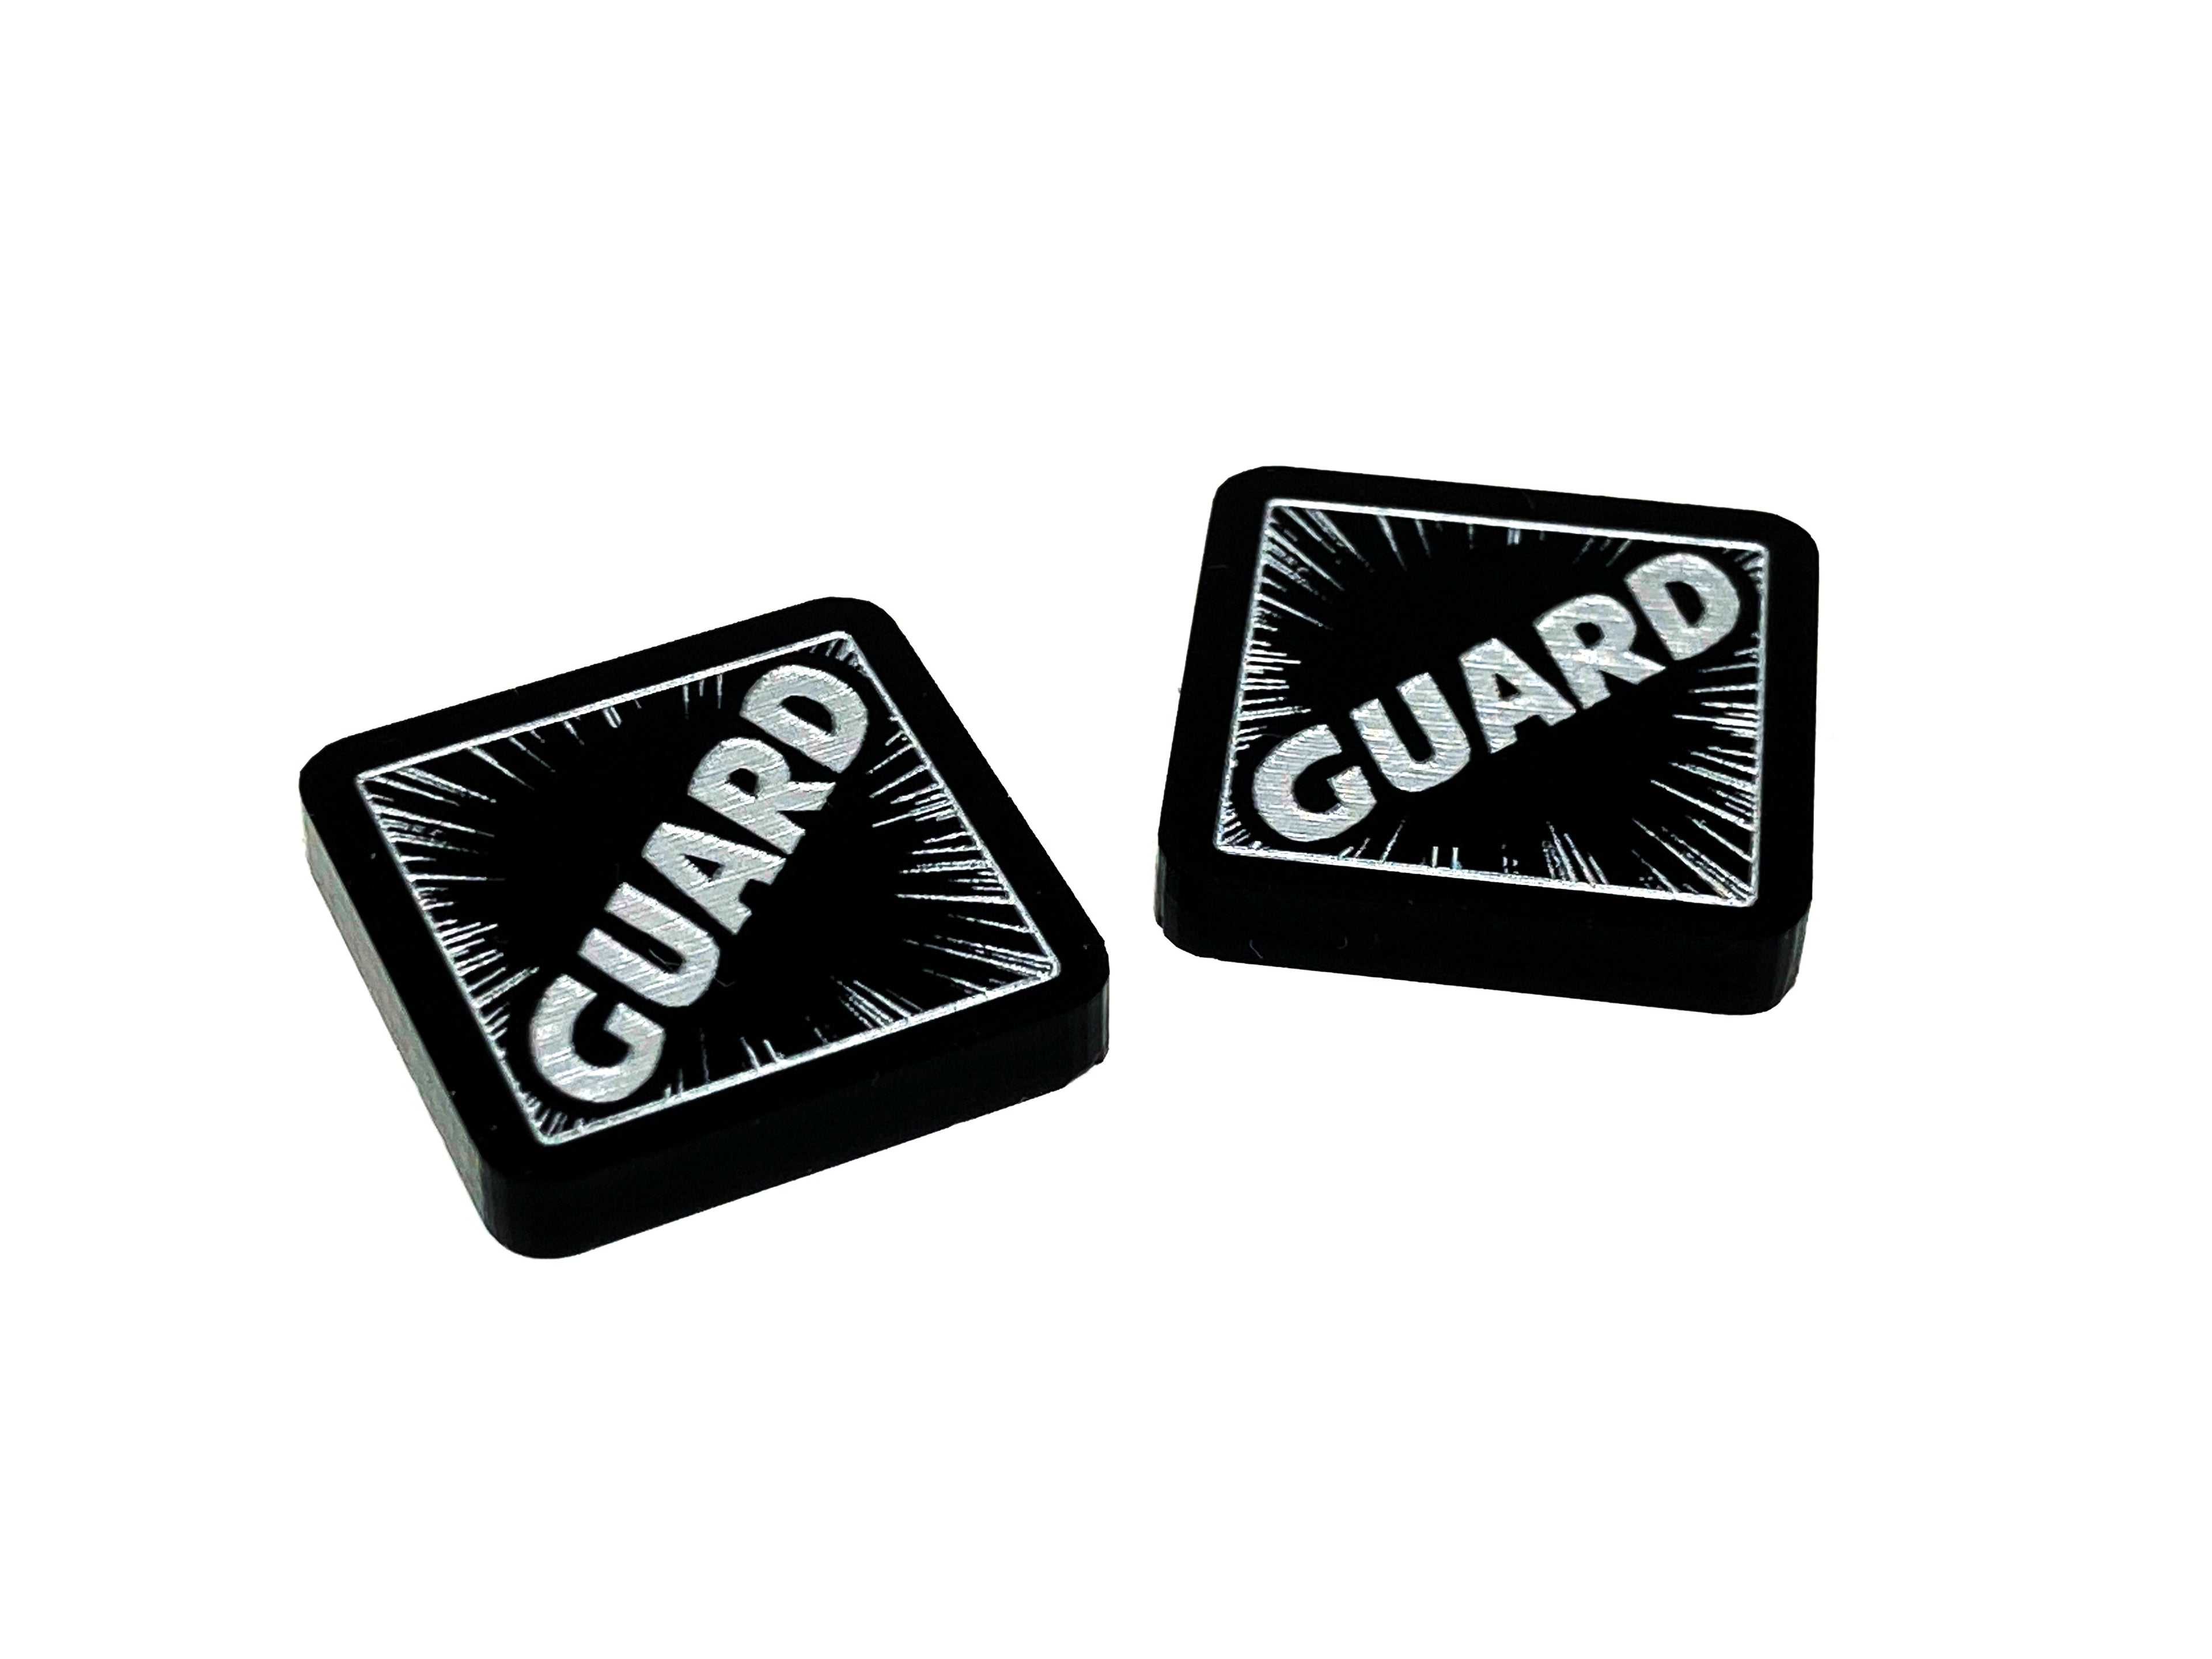 2 x Guard Tokens (double sided) for Marvel Champions LCG